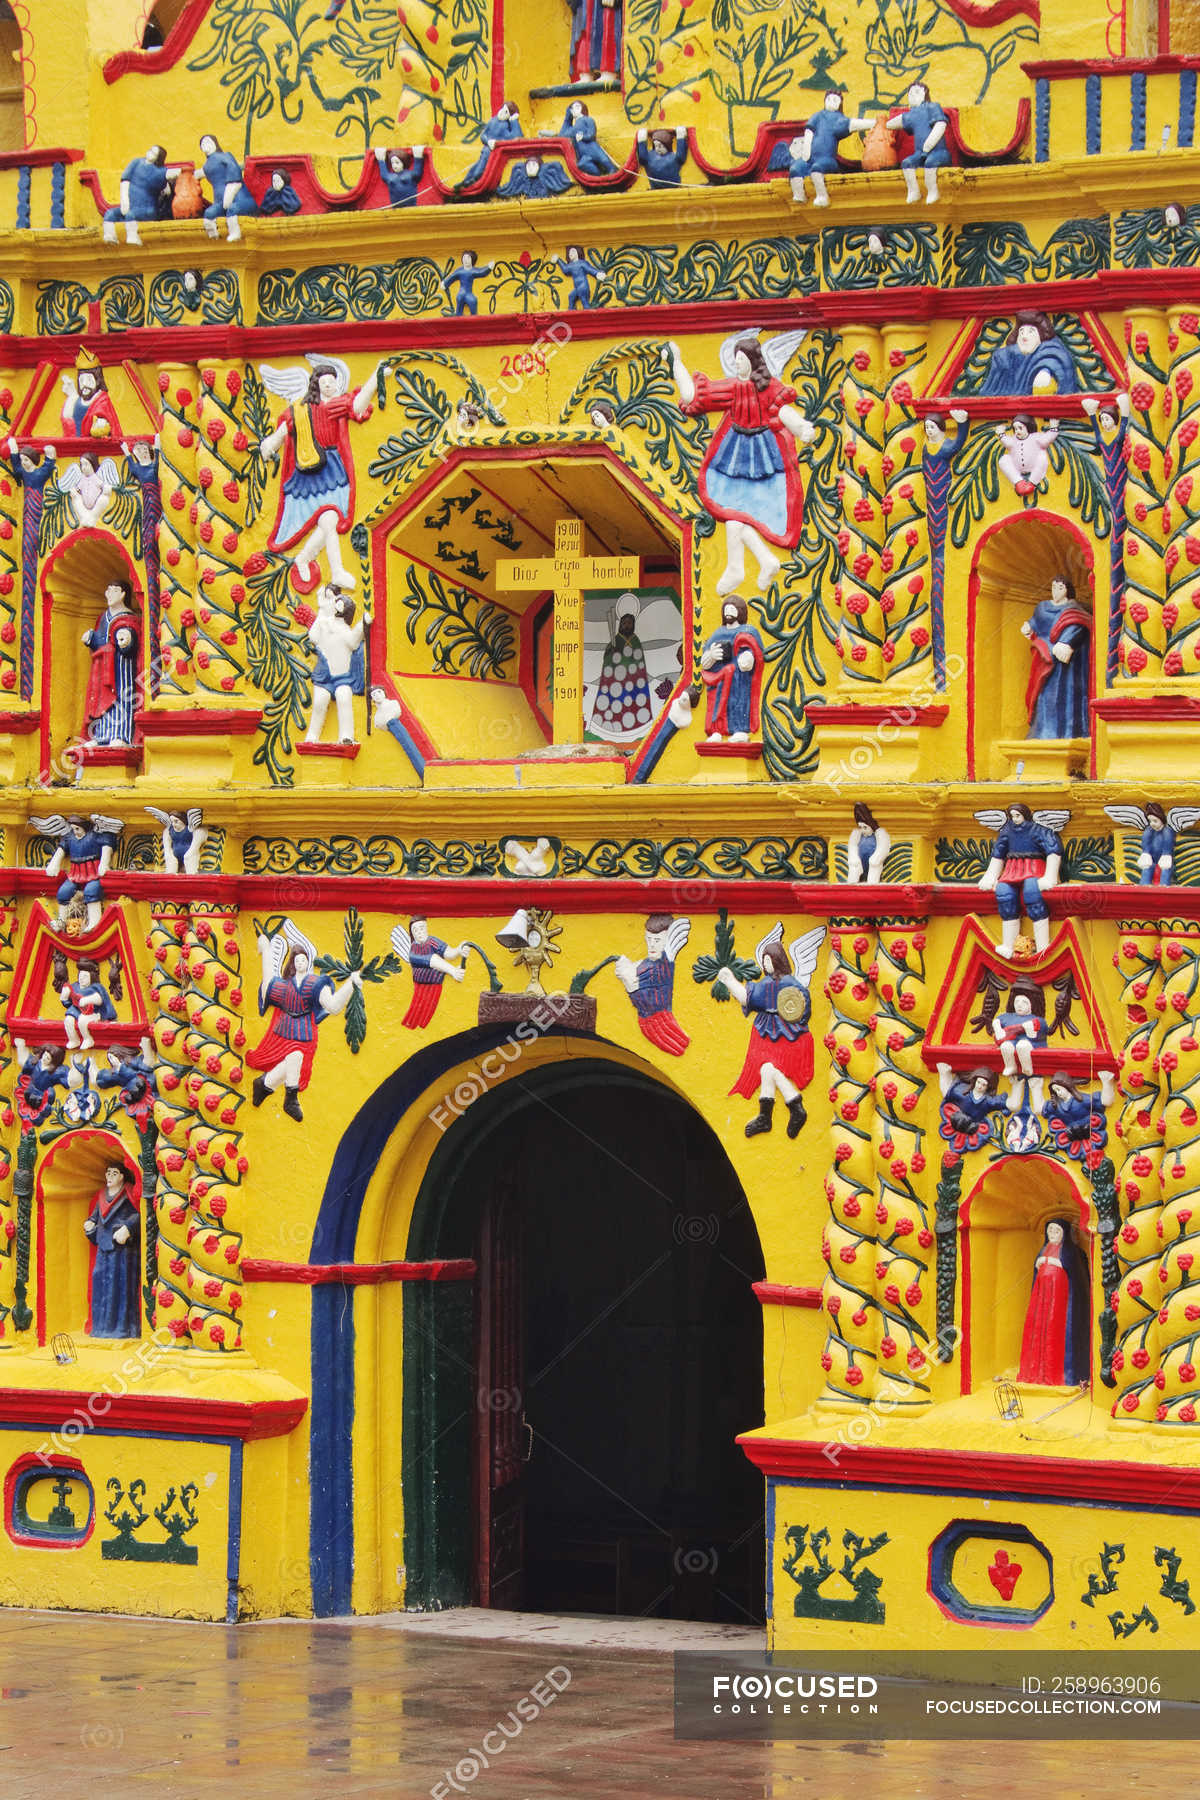 Colorful facade of church of San Andres Xecul, Guatemala — front door, colors - Stock Photo | #258963906